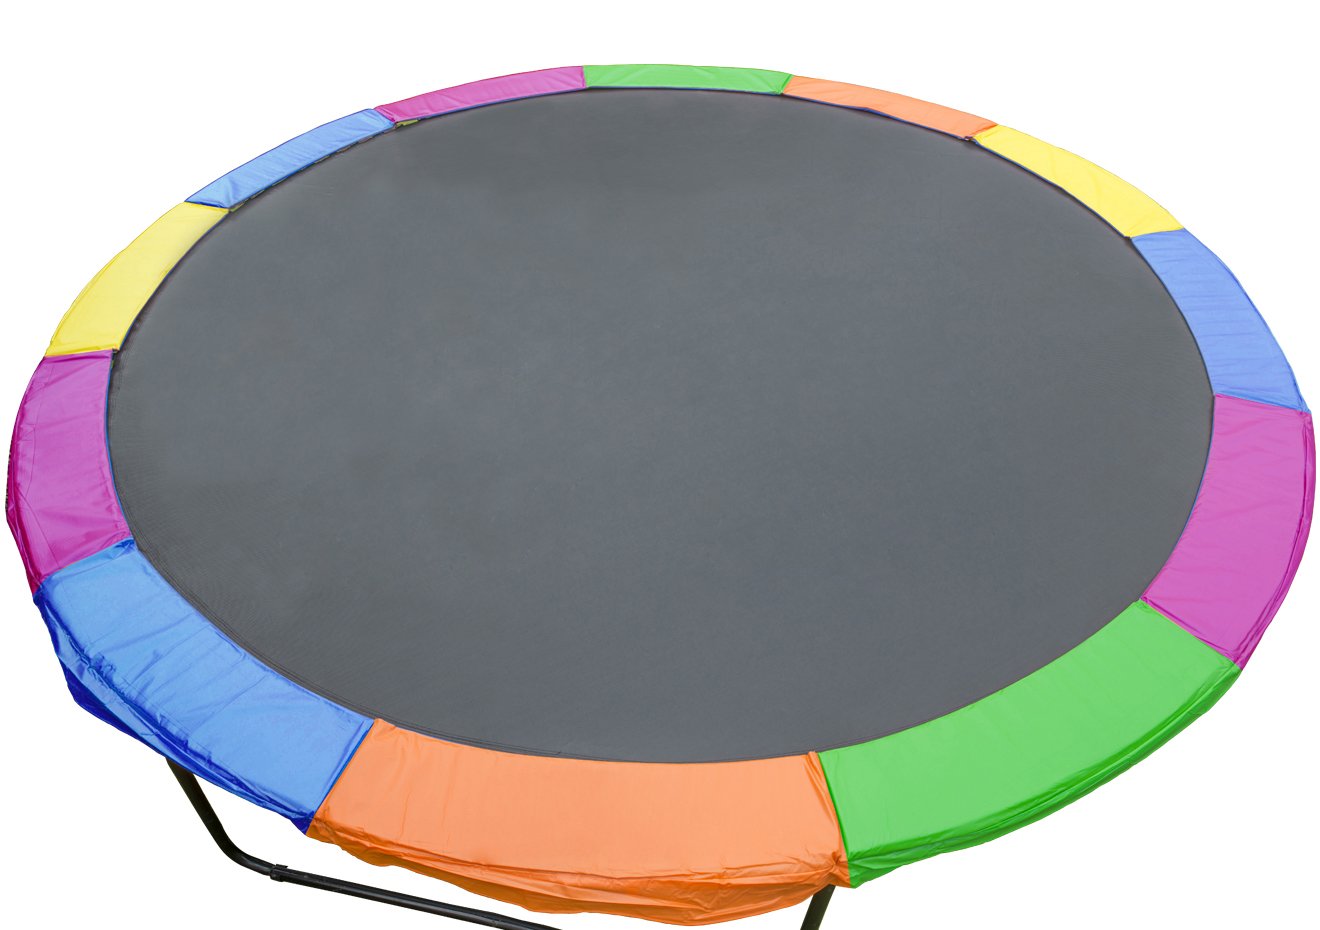 Trampoline 12ft Replacement Outdoor Round Spring Pad Cover - Rainbow 2